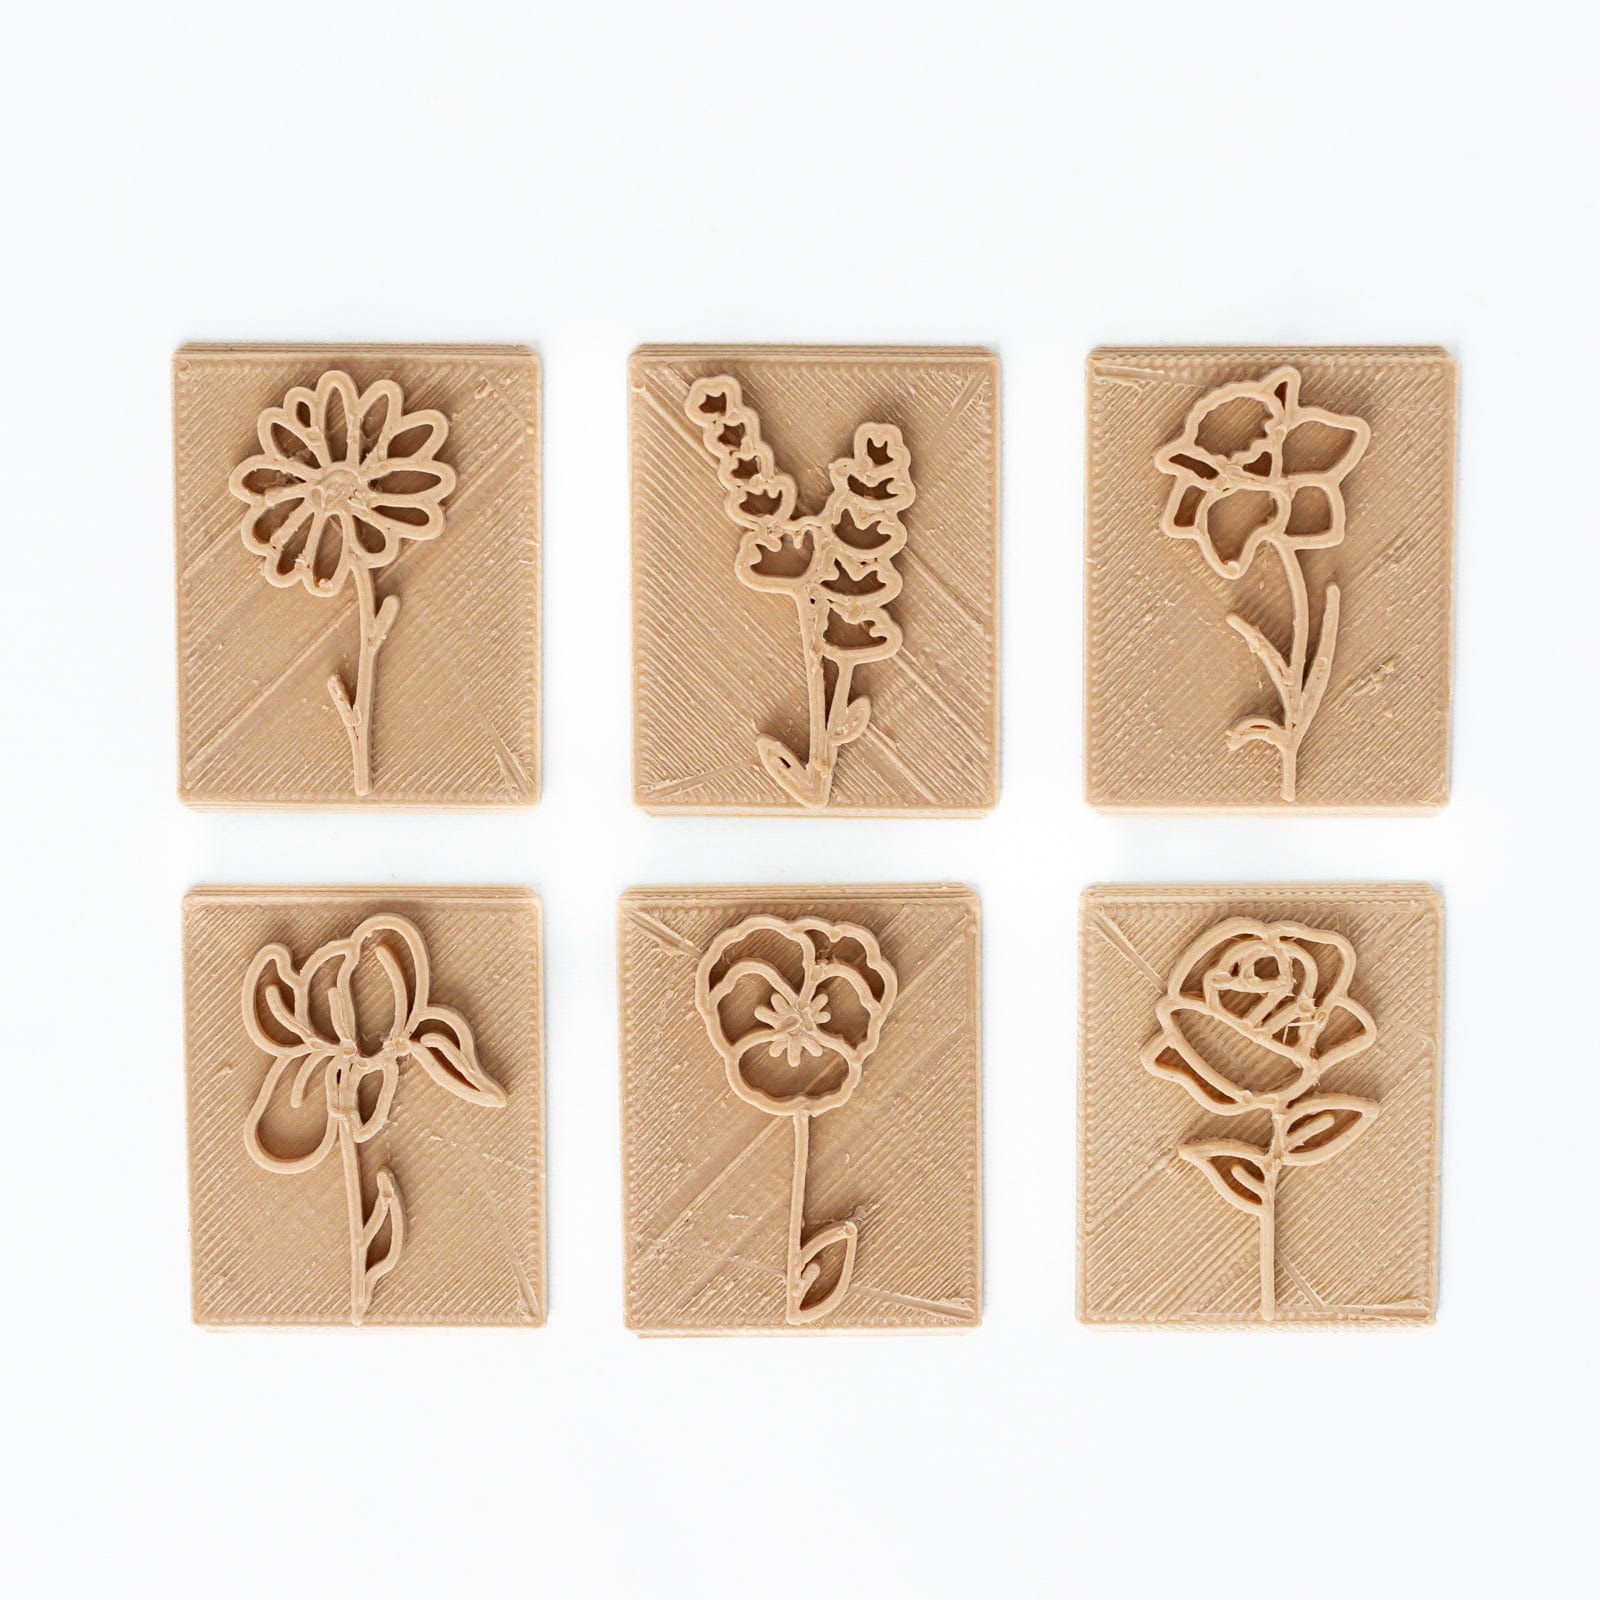 Personalised Stamp Eco-friendly Rubber Stamp Eco Stamp